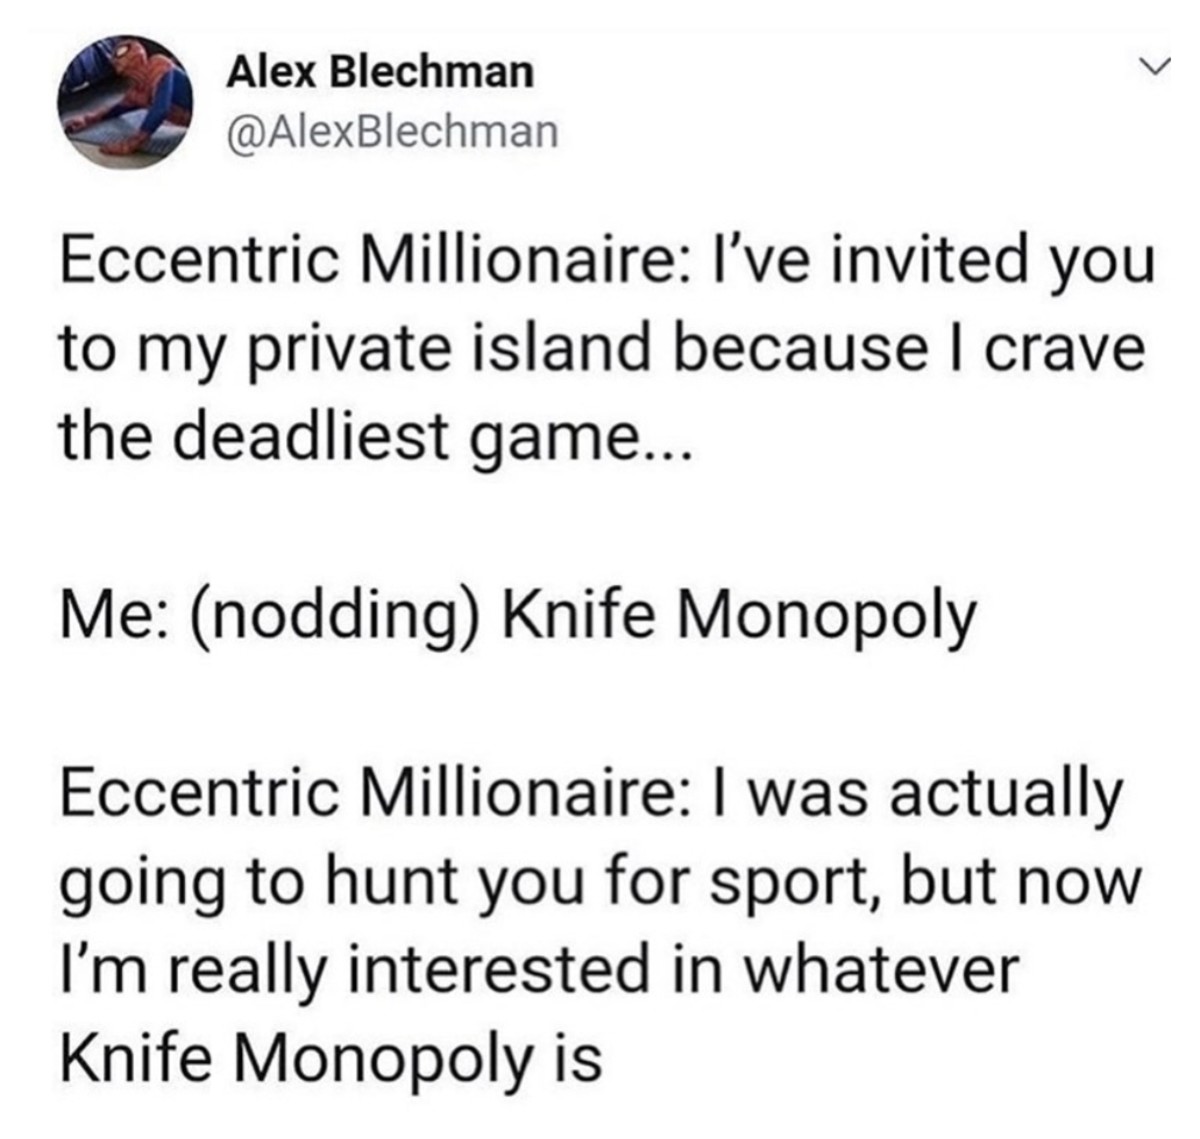 angle - Alex Blechman Eccentric Millionaire l've invited you to my private island because I crave the deadliest game... Me nodding Knife Monopoly Eccentric Millionaire I was actually going to hunt you for sport, but now I'm really interested in whatever K